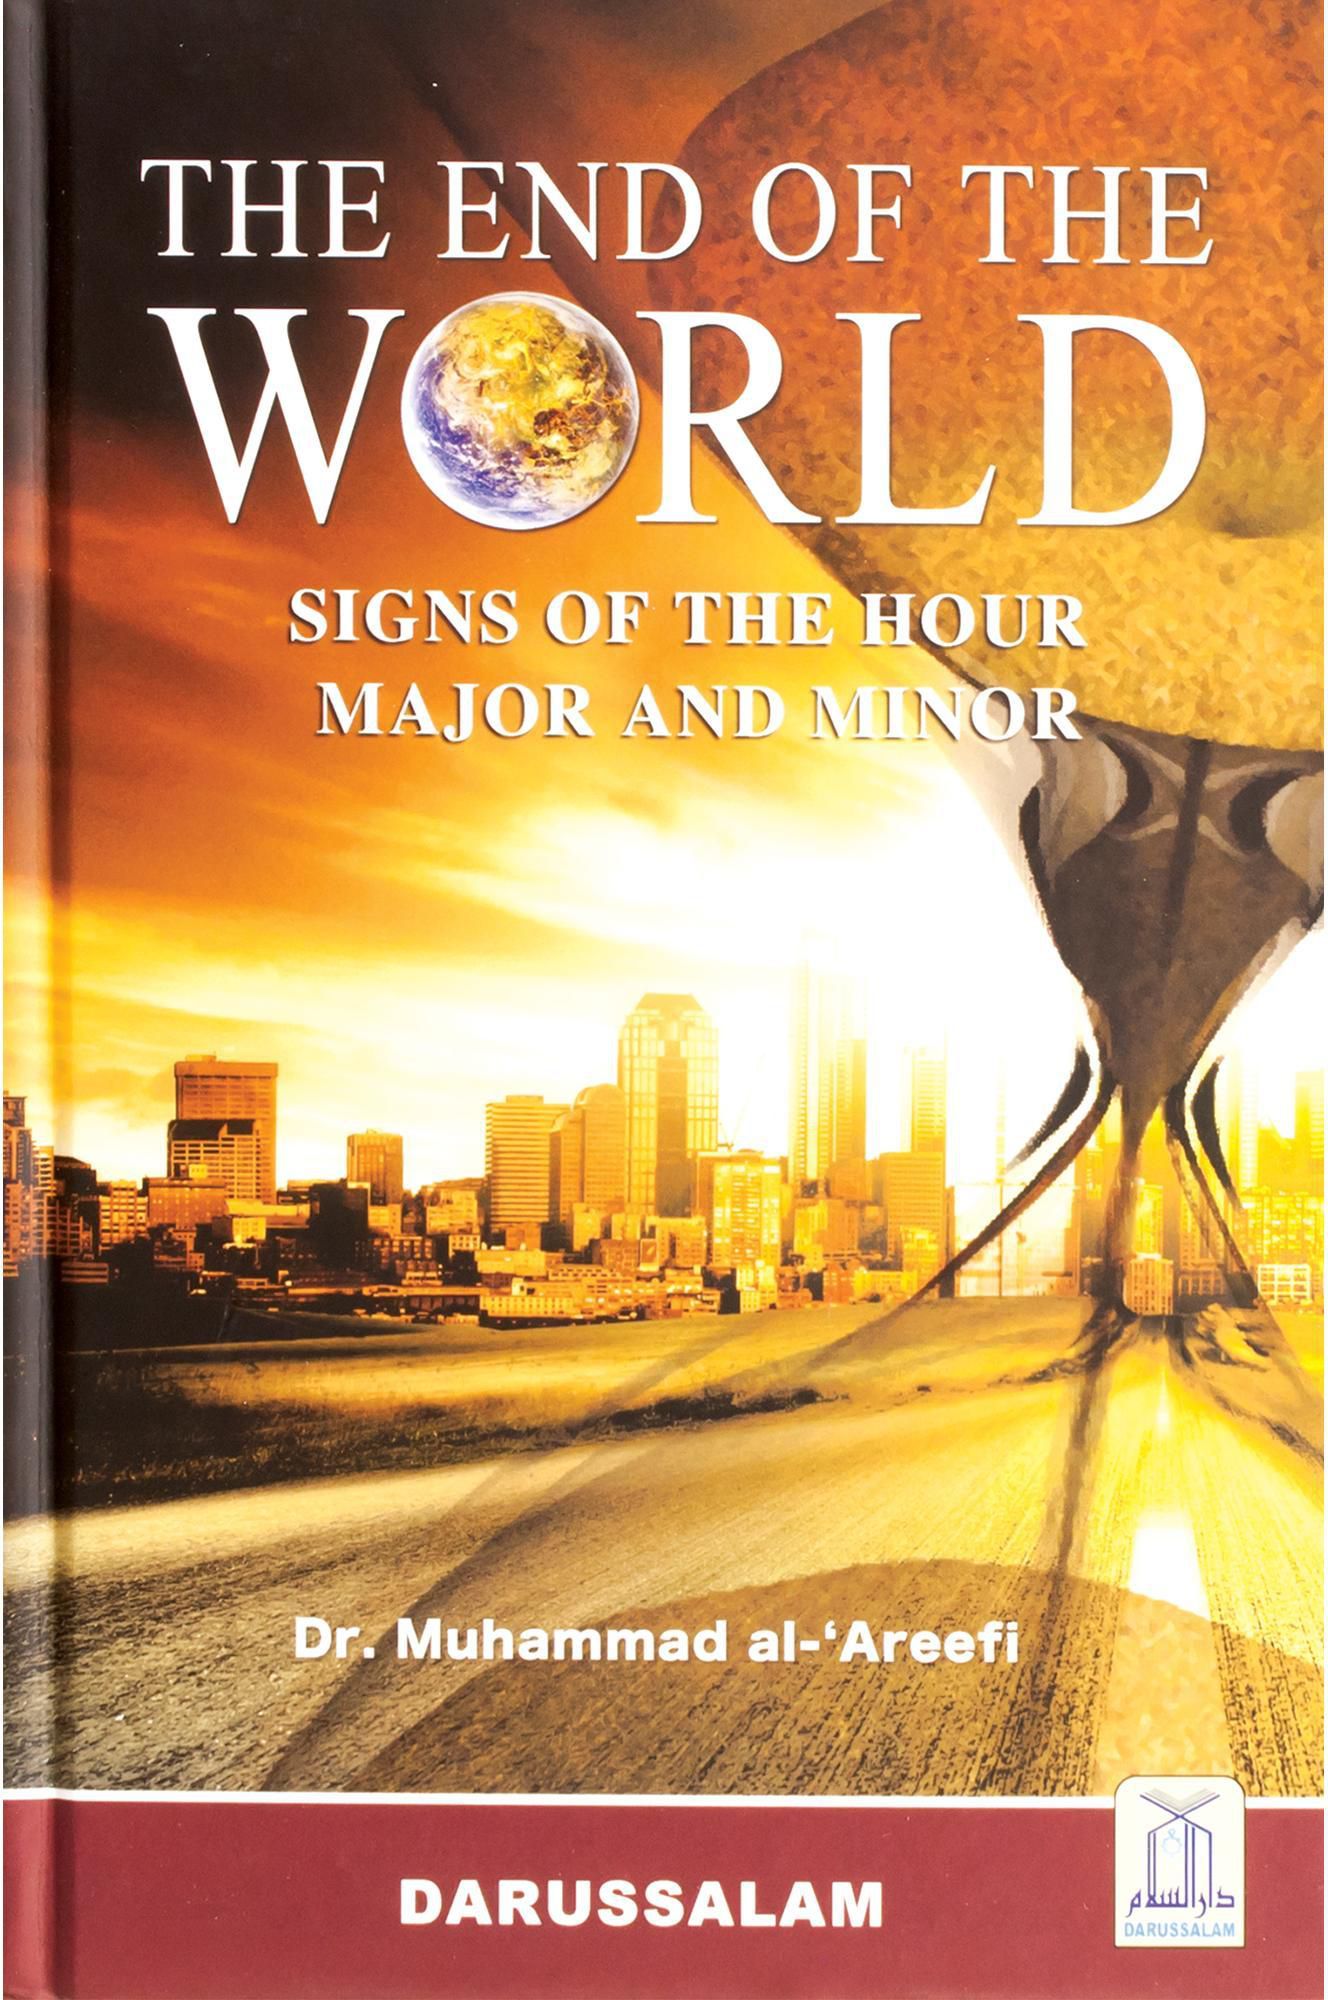 The End of the World: Major and Minor Signs of the Hour